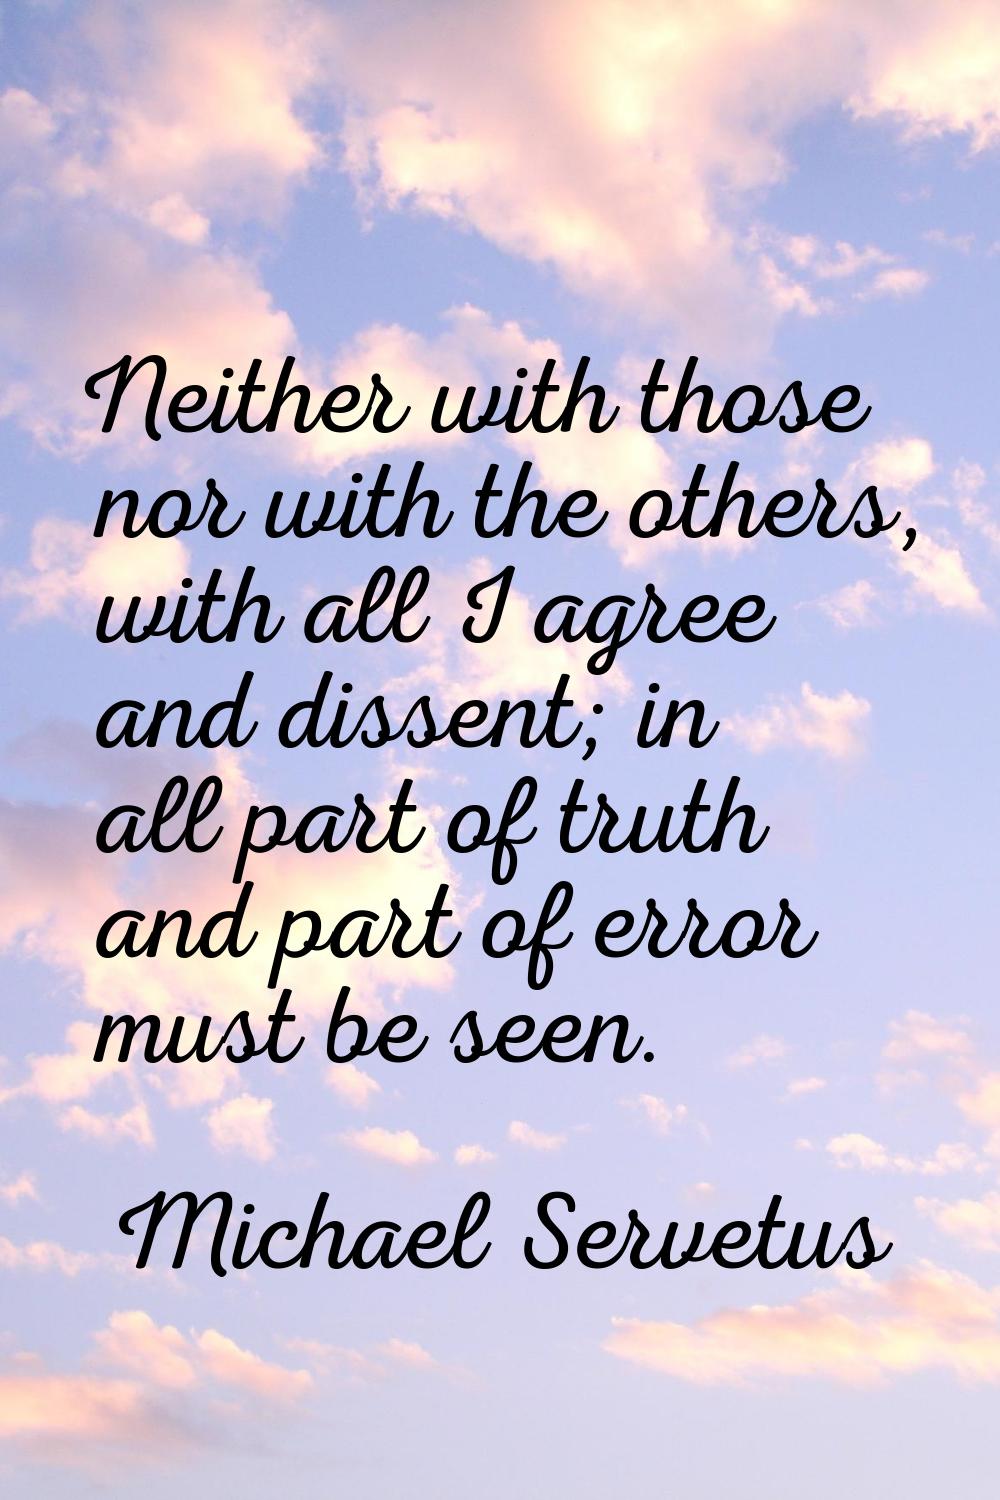 Neither with those nor with the others, with all I agree and dissent; in all part of truth and part